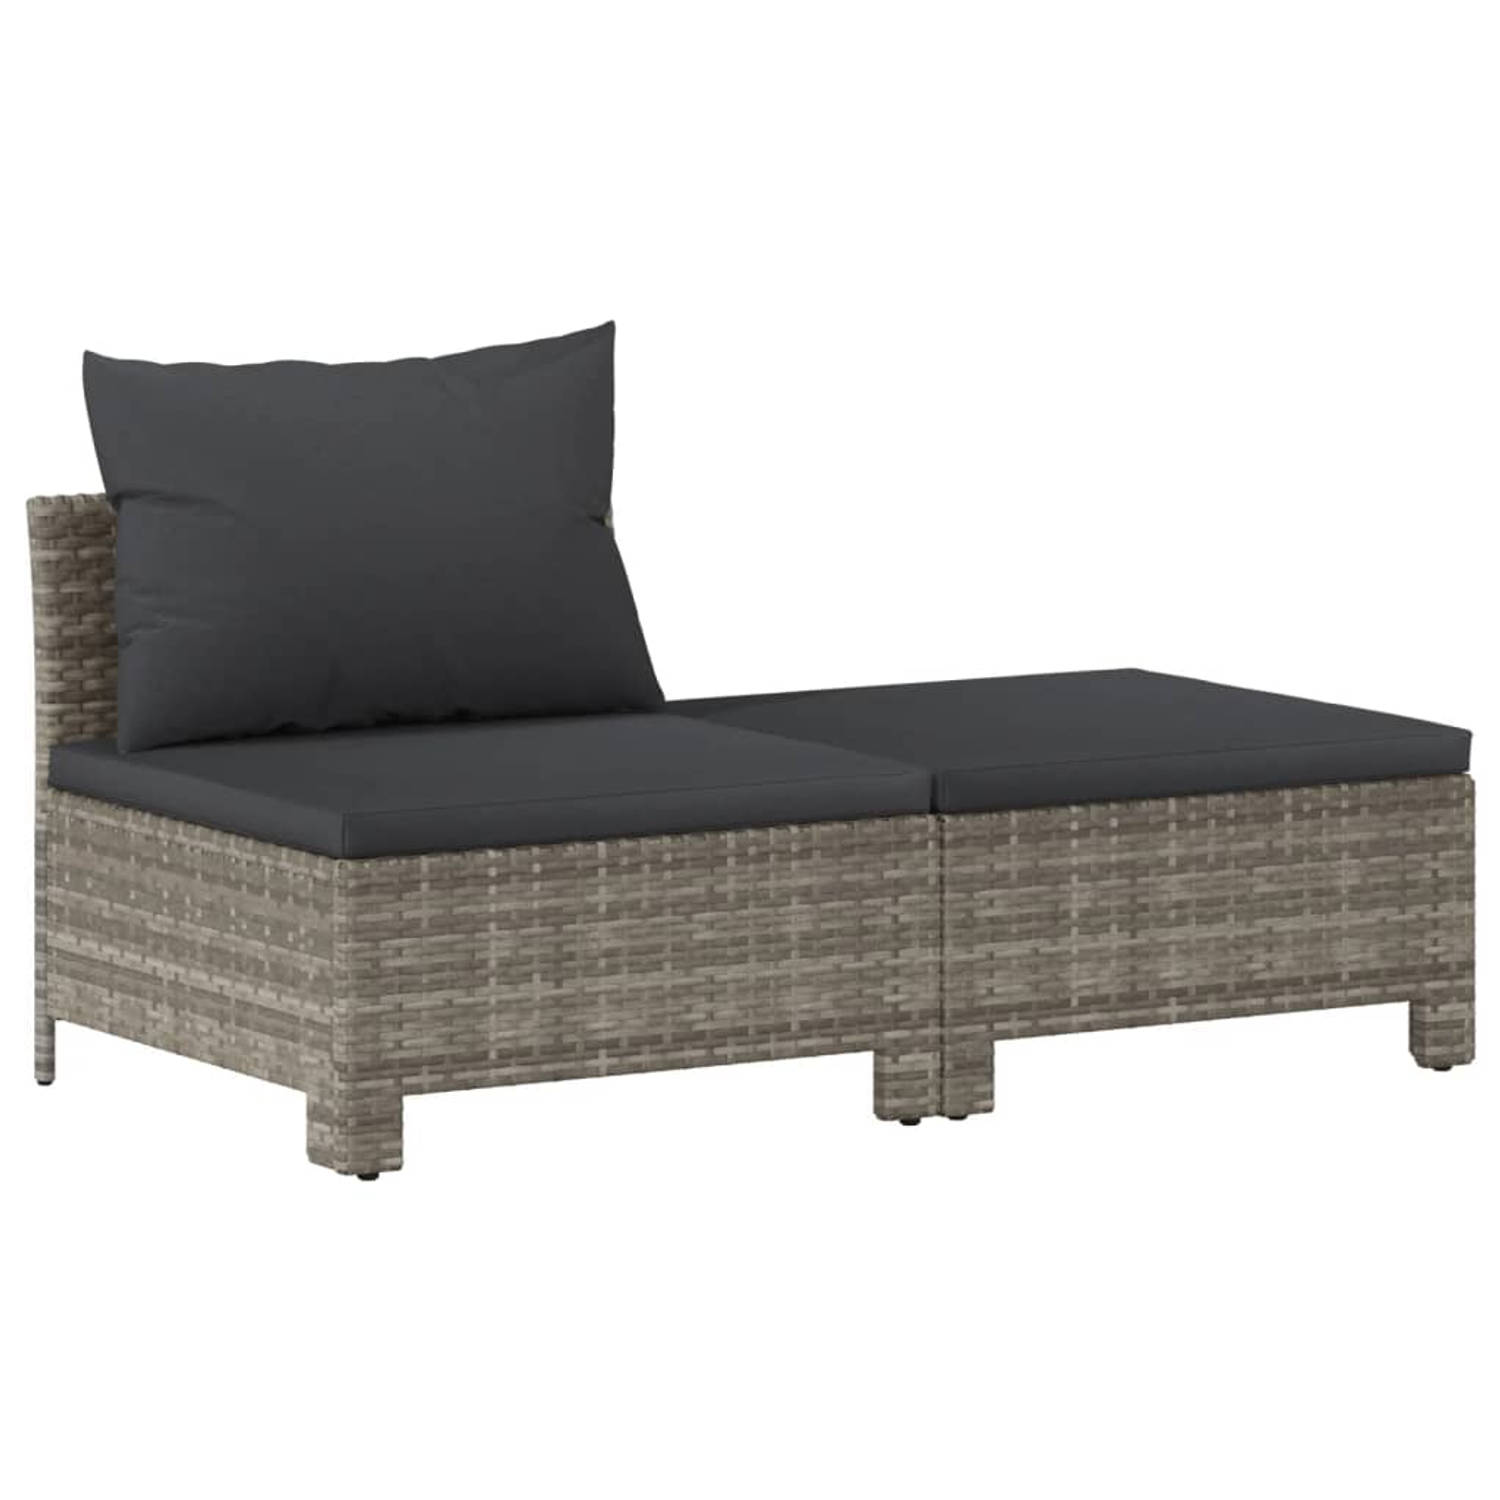 The Living Store Loungeset The Living Store Trendy Grijs 120x63x55.5 cm - Poly Rattan